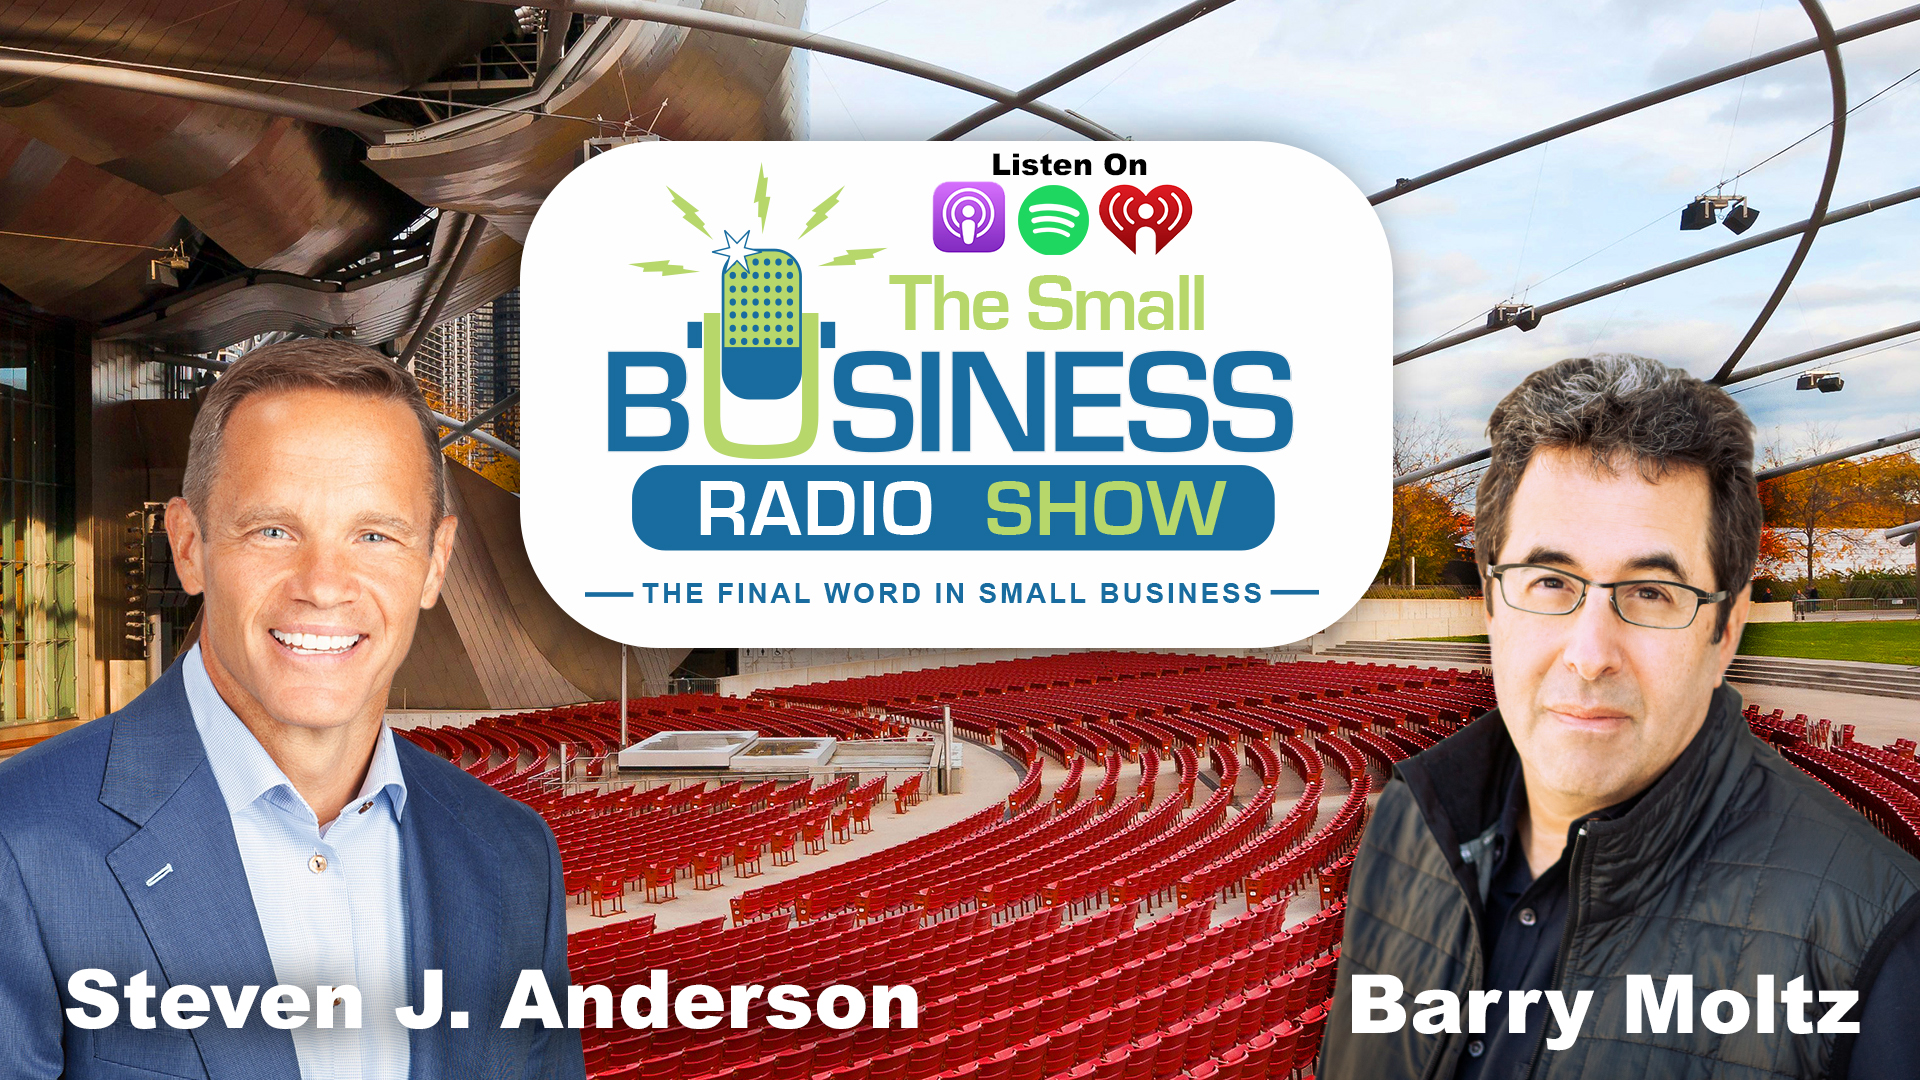 Steven J. Anderson on The Small Business Radio Show